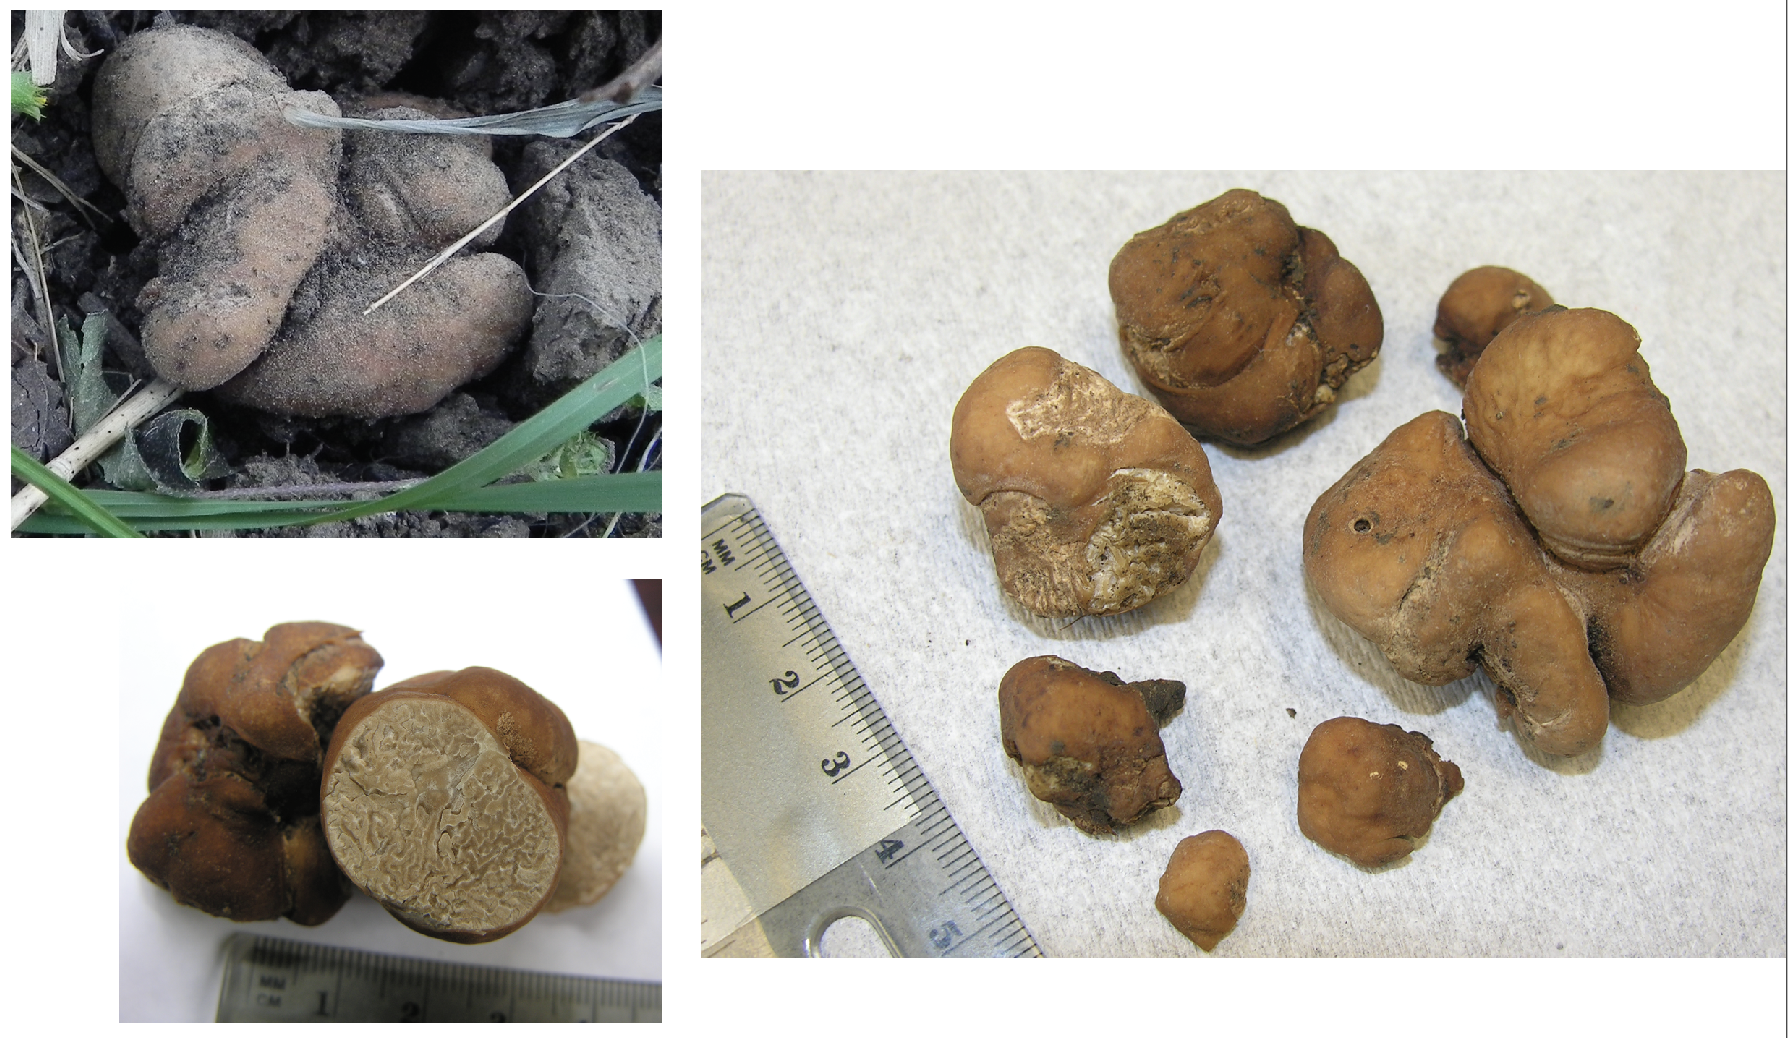 Figure 1. A whole truffle found in a Texas pecan orchard (a), above. Washing and cleaning the truffles reaveals an orange-brown color of the outer ‘skin’ (b), right Cross section through a pecan truffle shows the marbled pattern of cream and light brown internal tissue (c), bottom left.